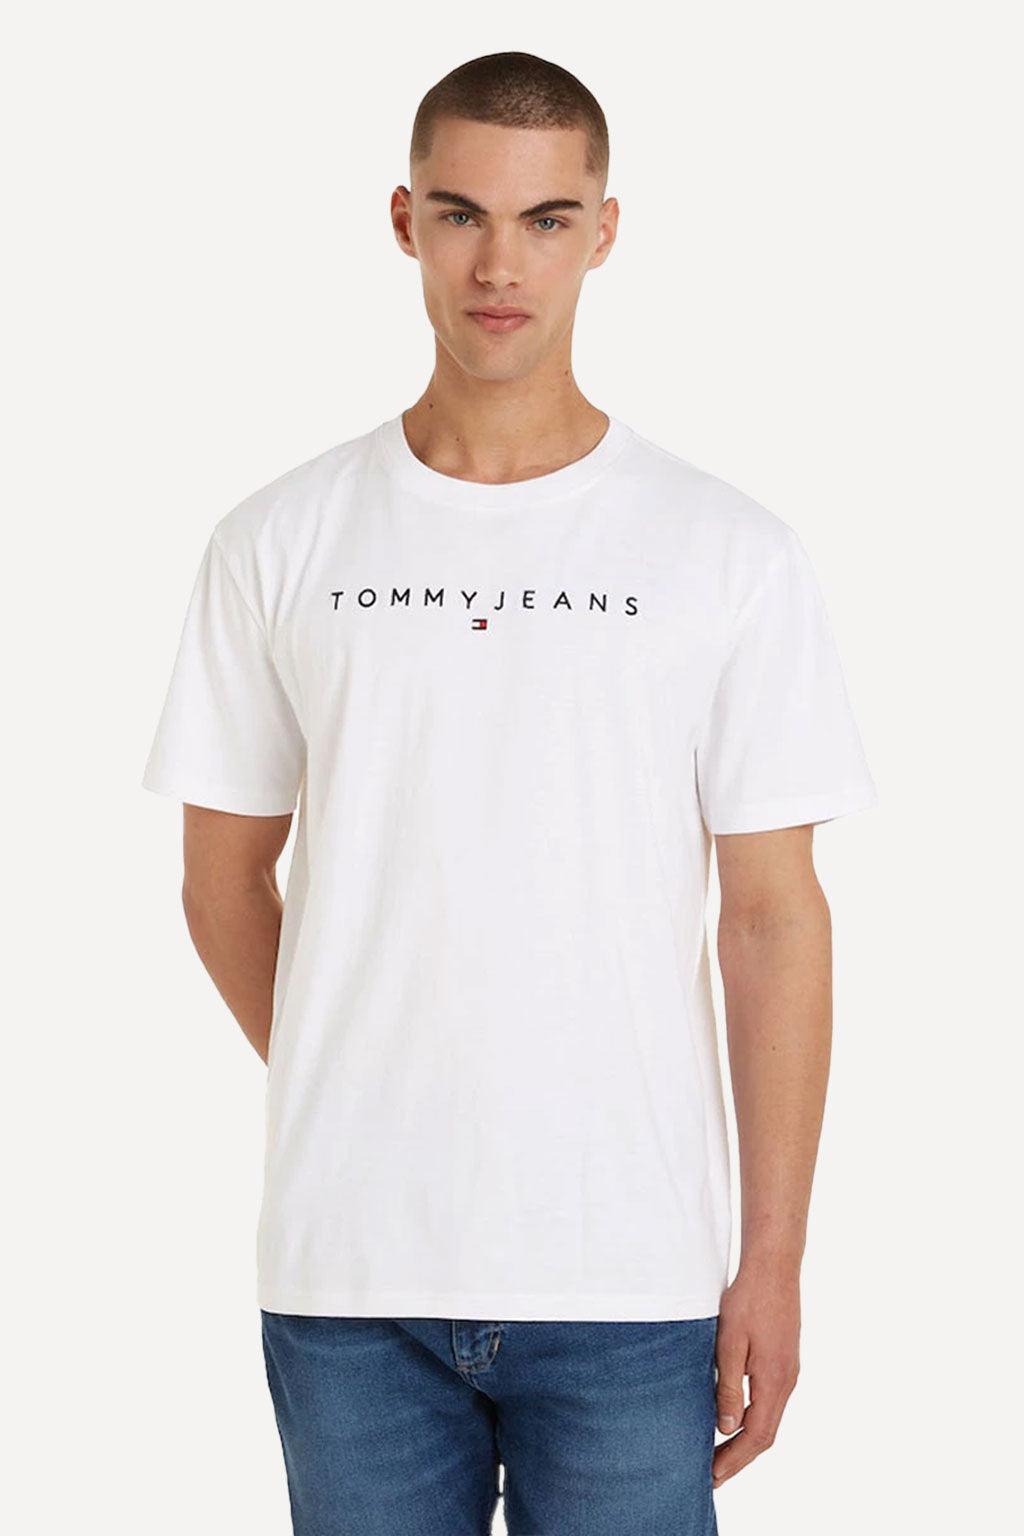 Tommy Jeans t-shirt - Big Boss | the menswear concept